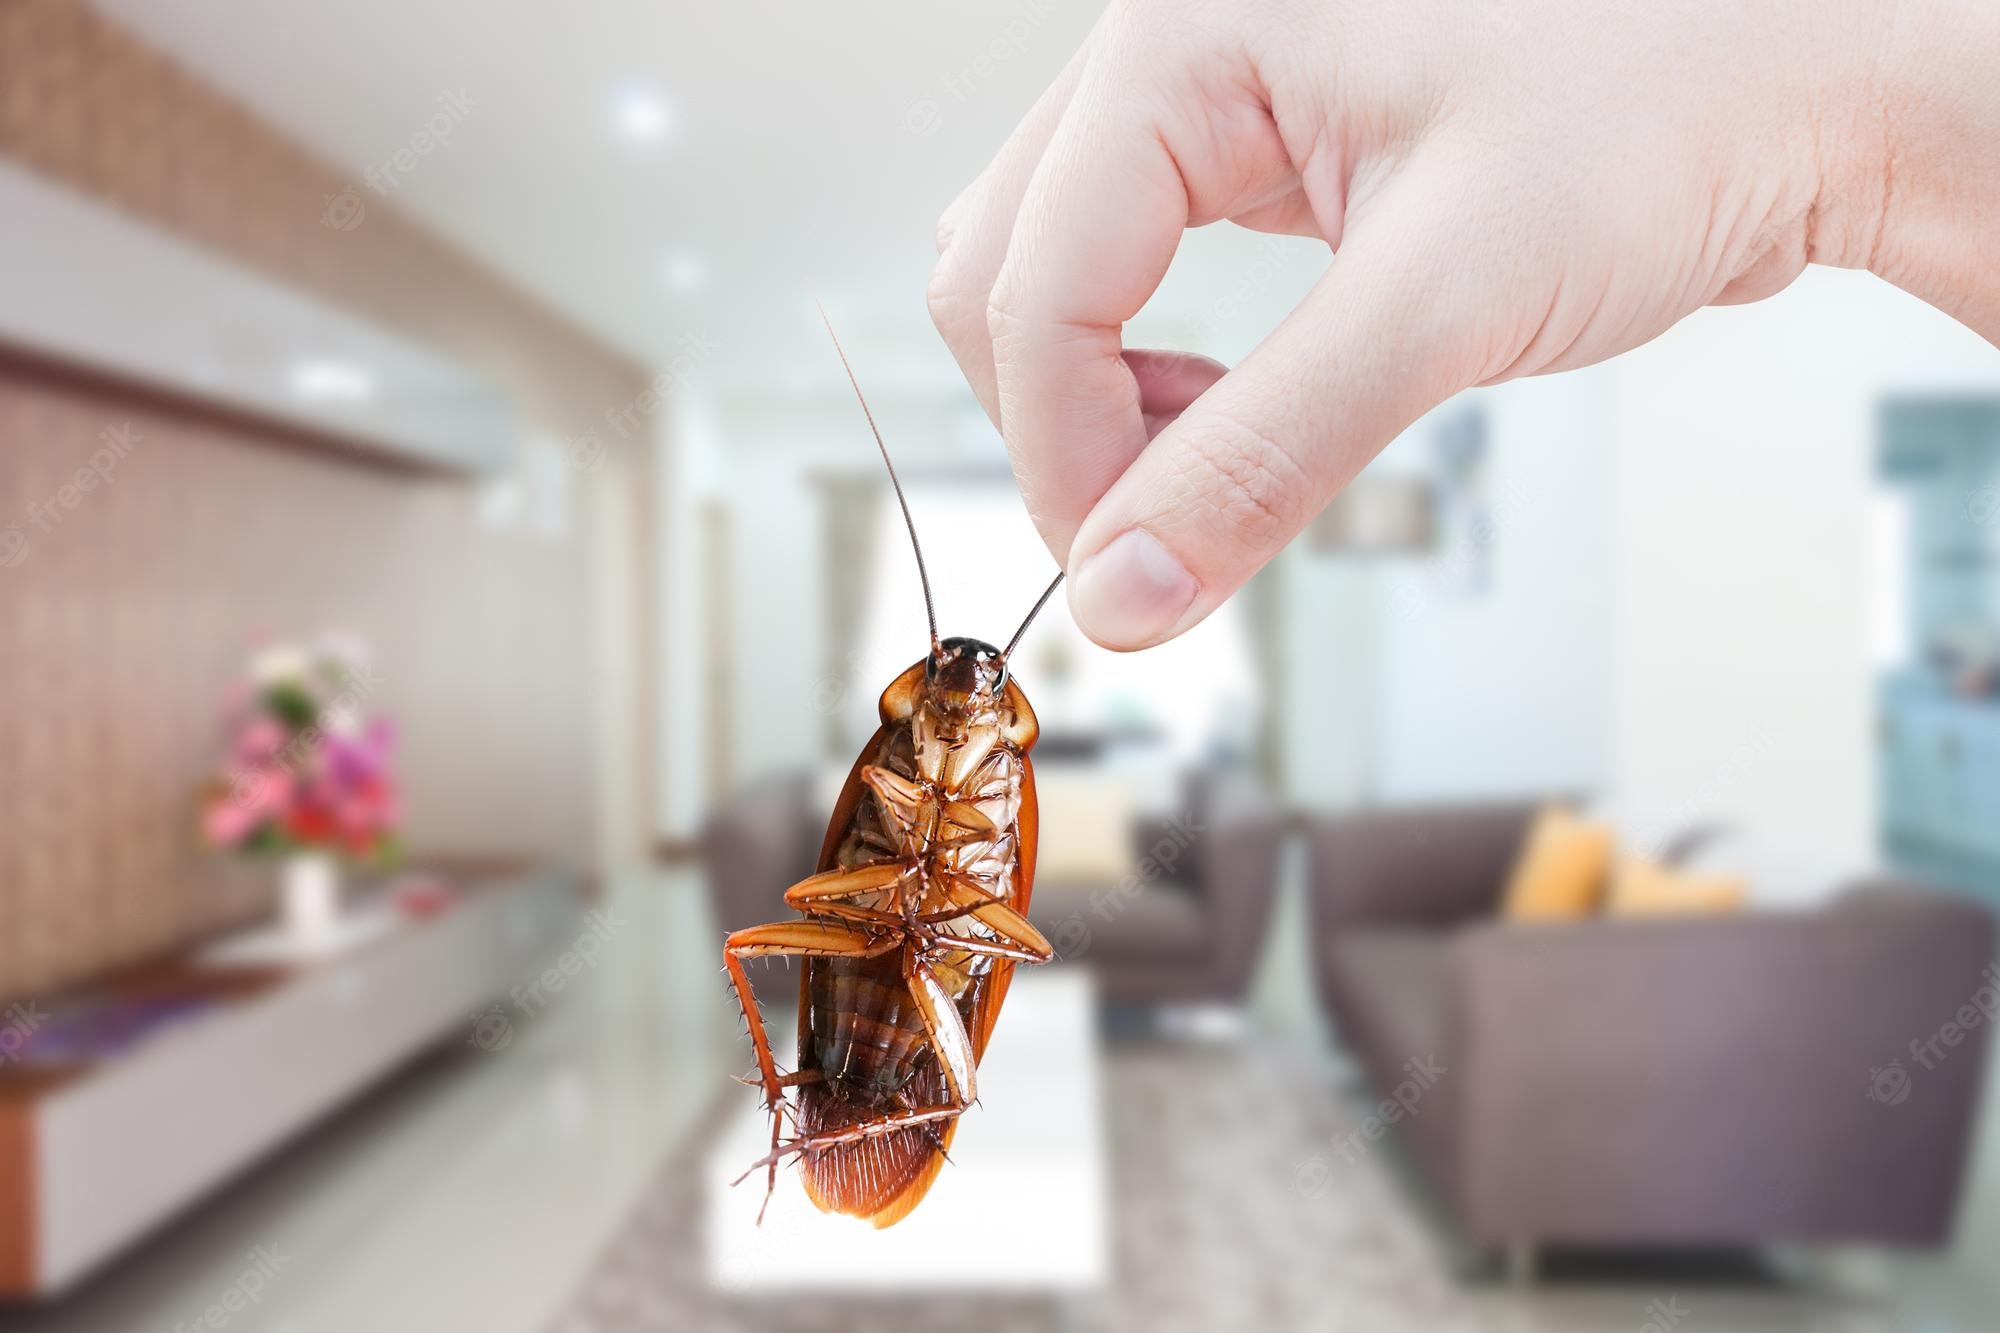 10 Natural Ways to Repel Cockroaches at Home